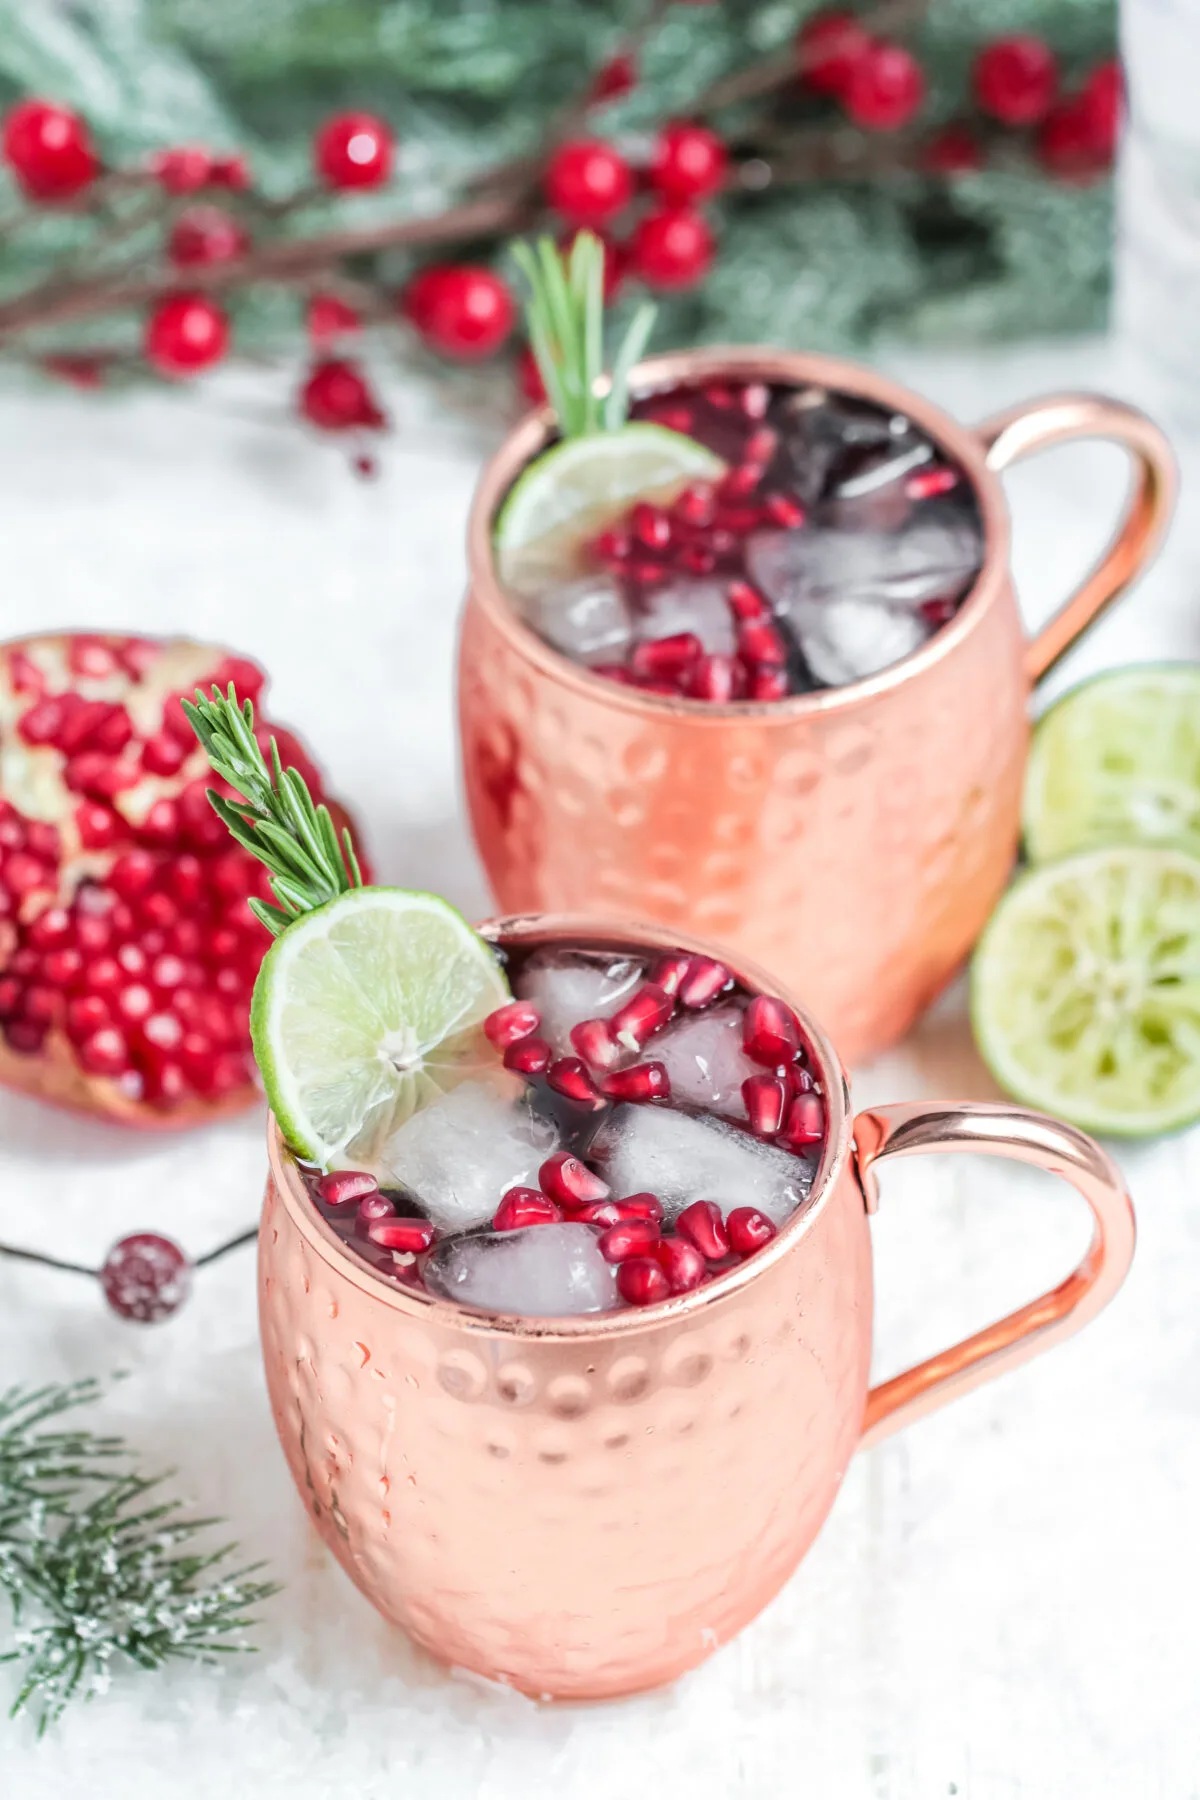 Looking for a festive drink to serve at your Christmas party? This pomegranate Moscow mule recipe is a perfect holiday cocktail!